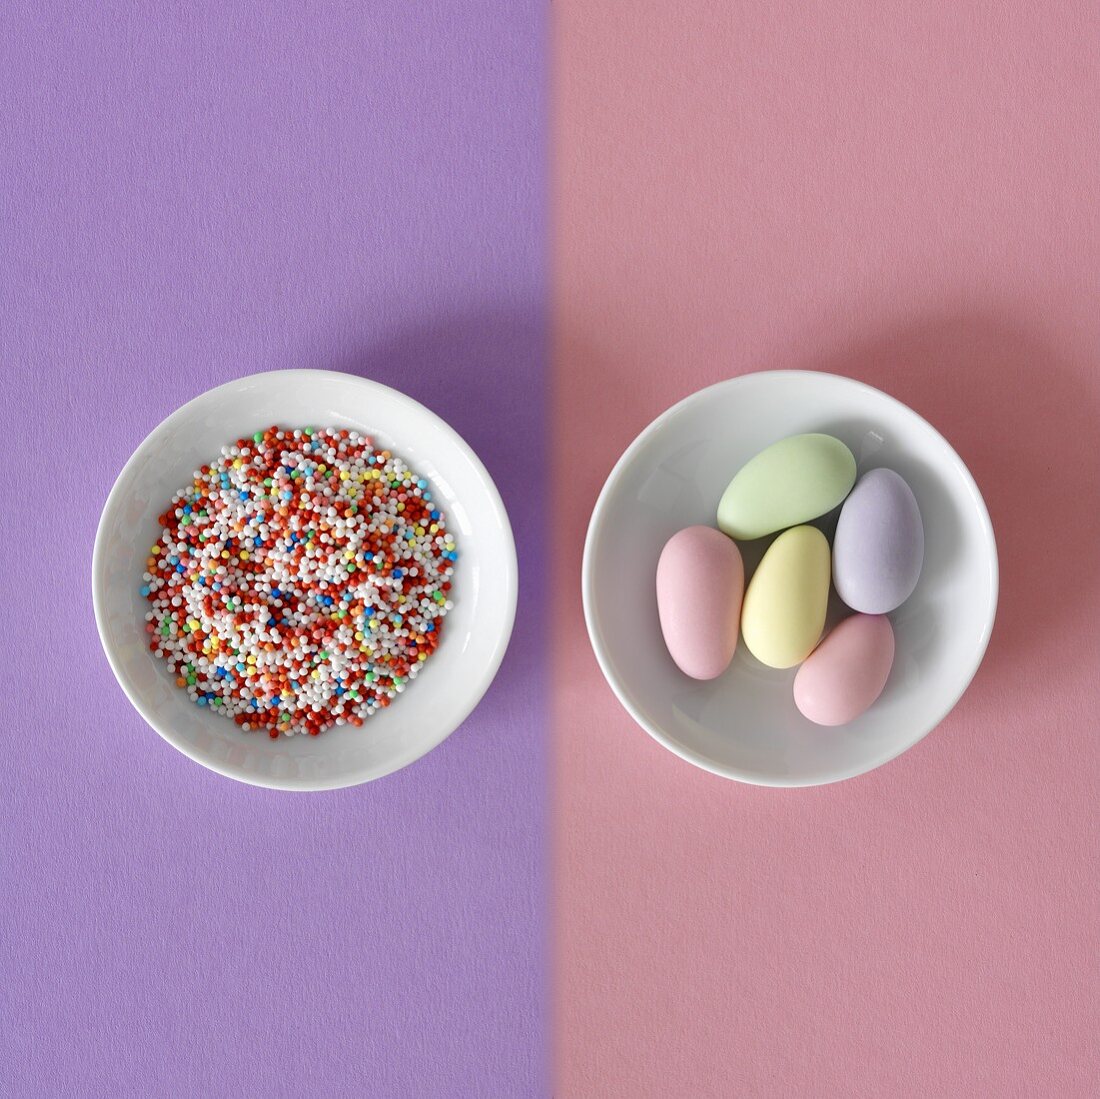 Sprinkles and sugared almonds